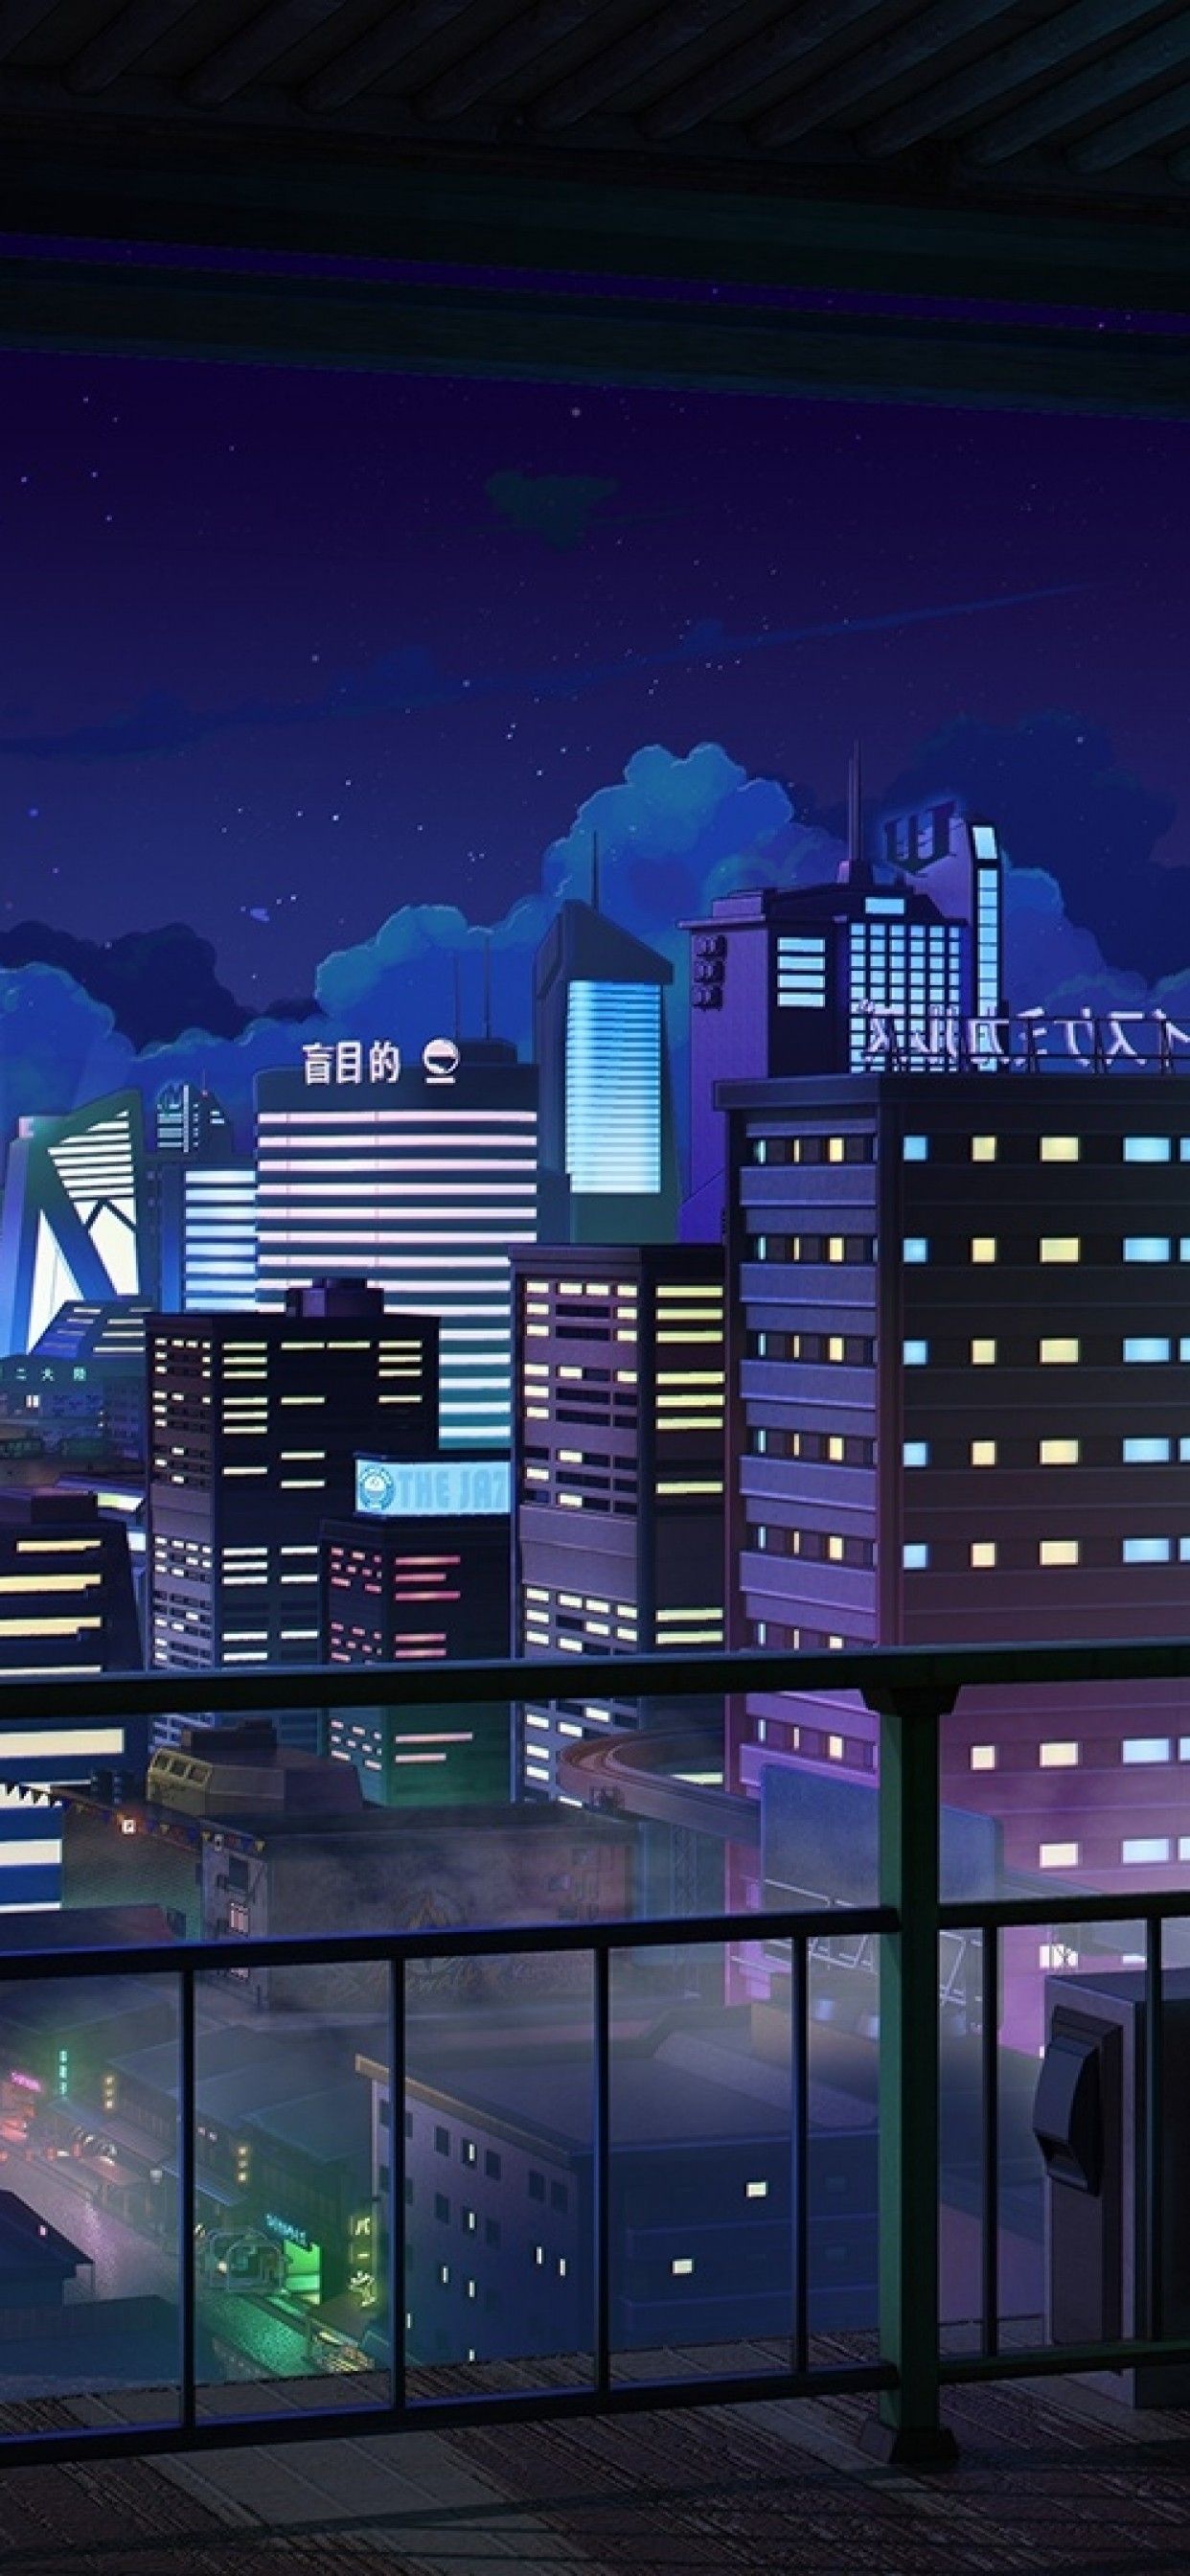 Download 1242x2688 Anime Cityscape, Night, Buildings, Balcony, Stars, Scenery Wallpaper for iPhone 11 Pro Max & XS Max